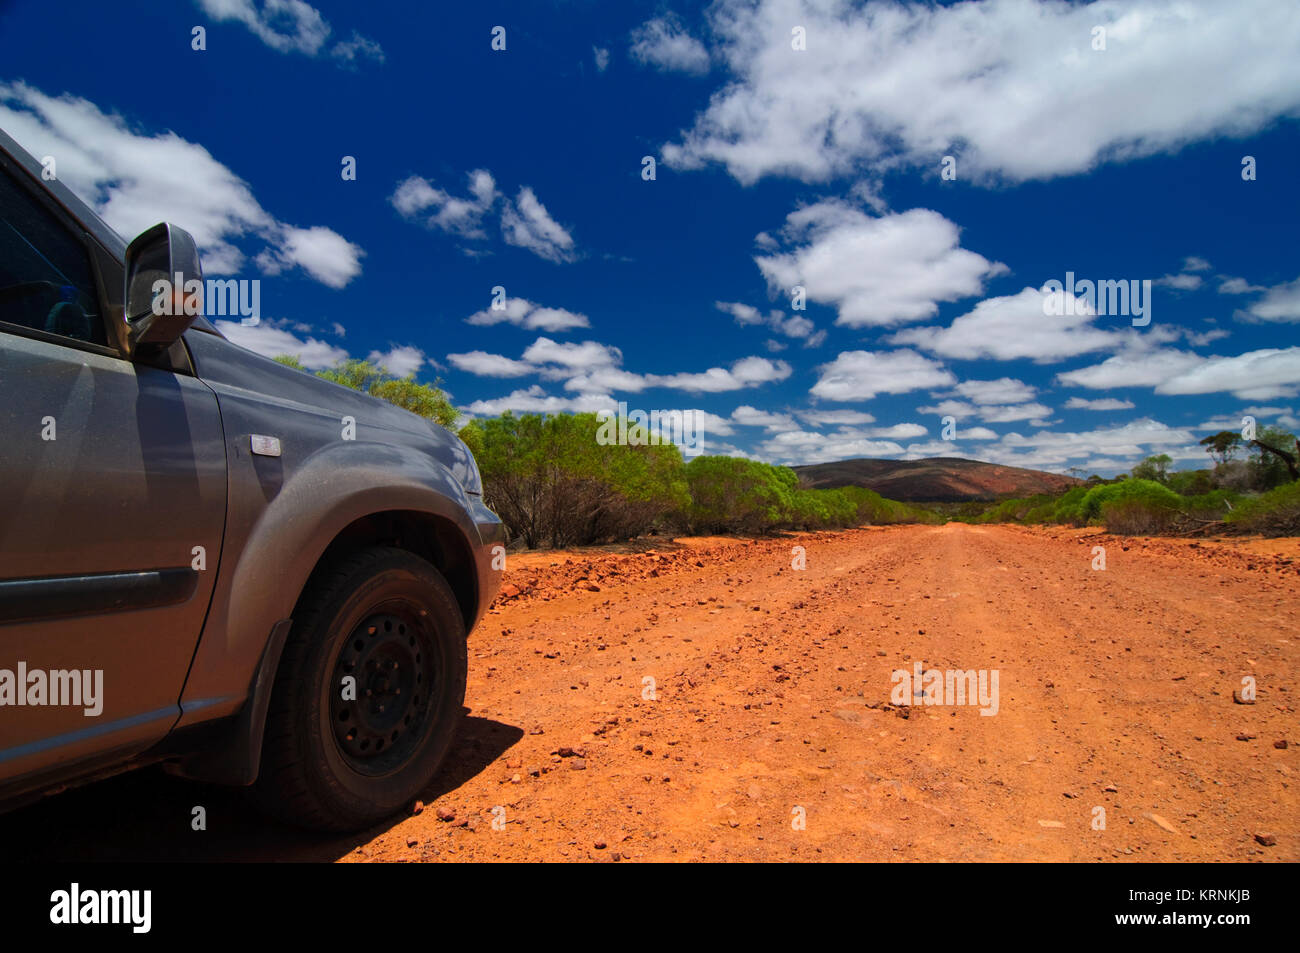 A Car on a Red Dirt Road in South Australian Outback, Gawler Ranges, South Australia (SA), Australia Stock Photo